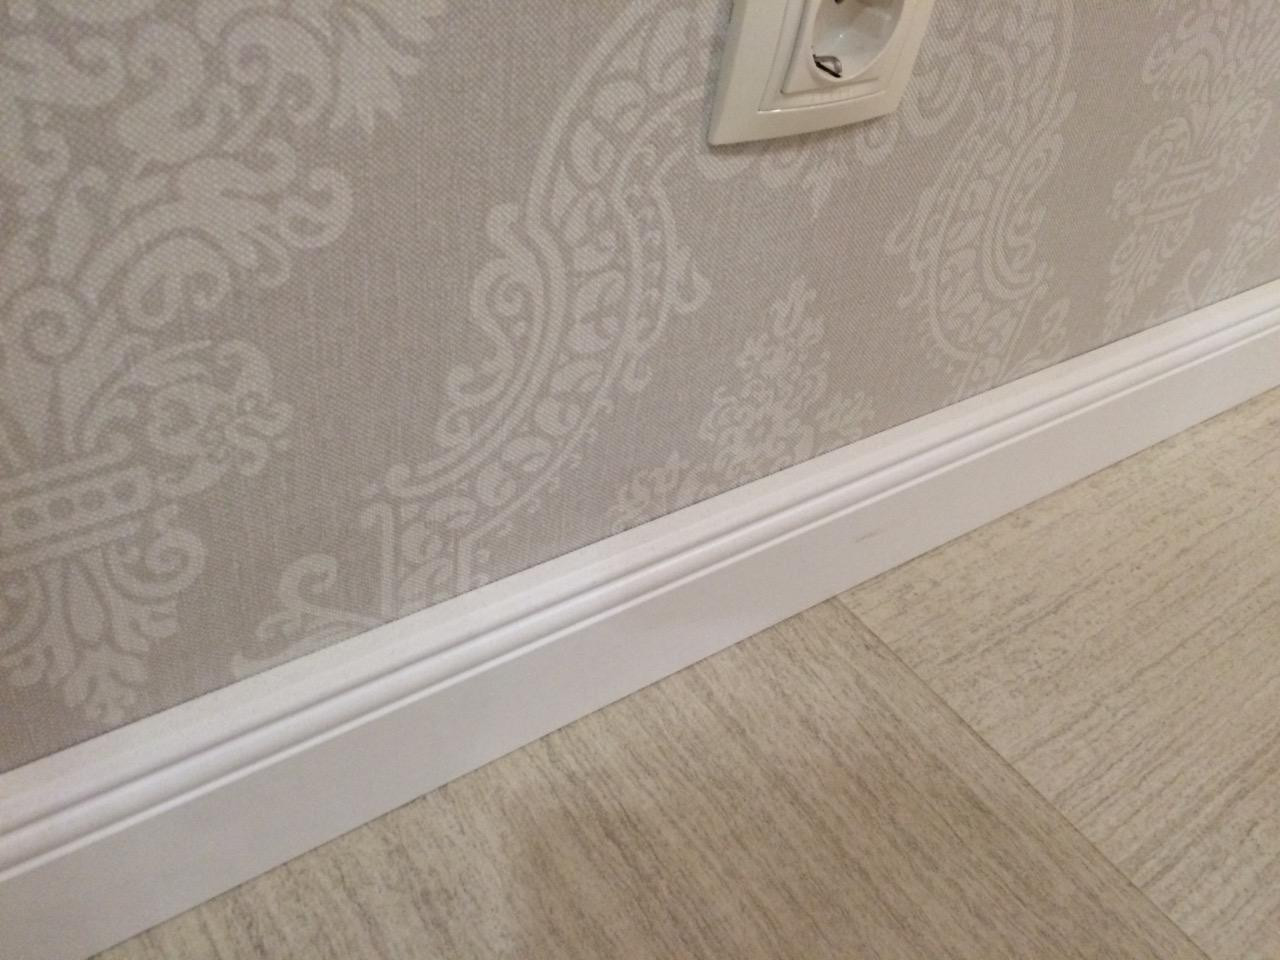 white plastic baseboard in the interior of the apartment